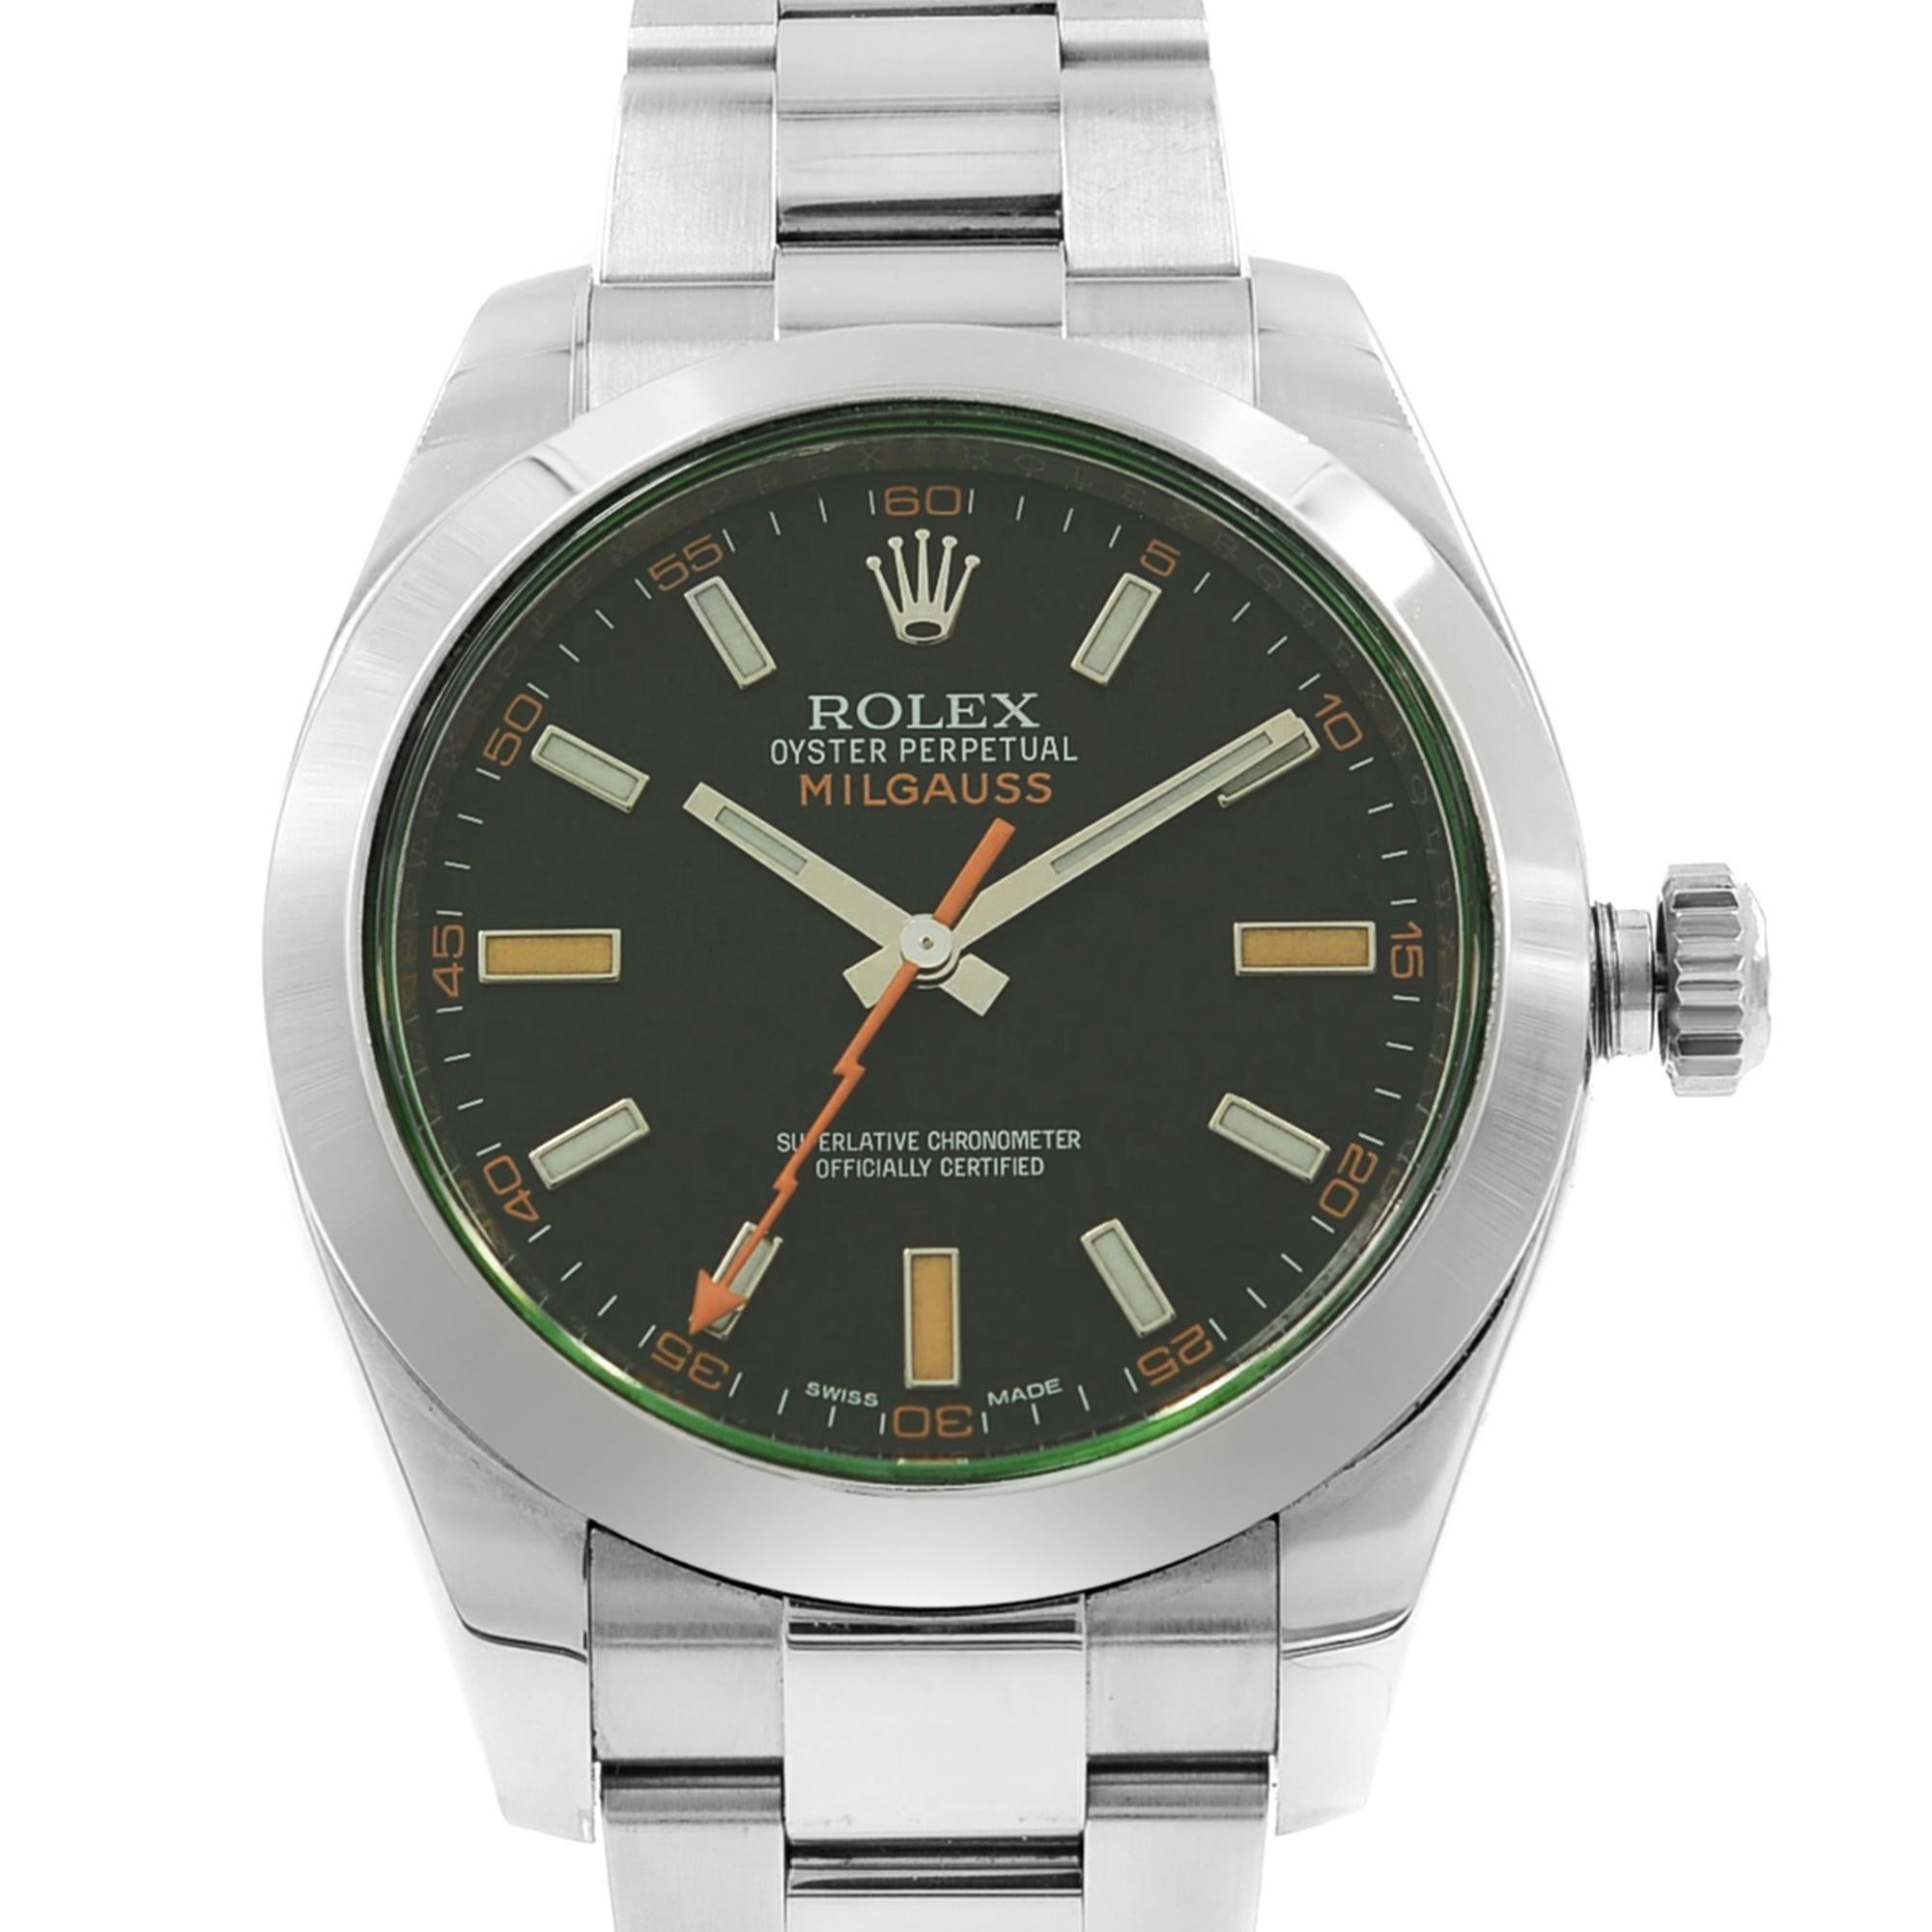 This pre-owned Rolex Milgauss  116400  is a beautiful men's timepiece that is powered by an automatic movement which is cased in a stainless steel case. It has a round shape face,  dial, and has hand sticks style markers. It is completed with a